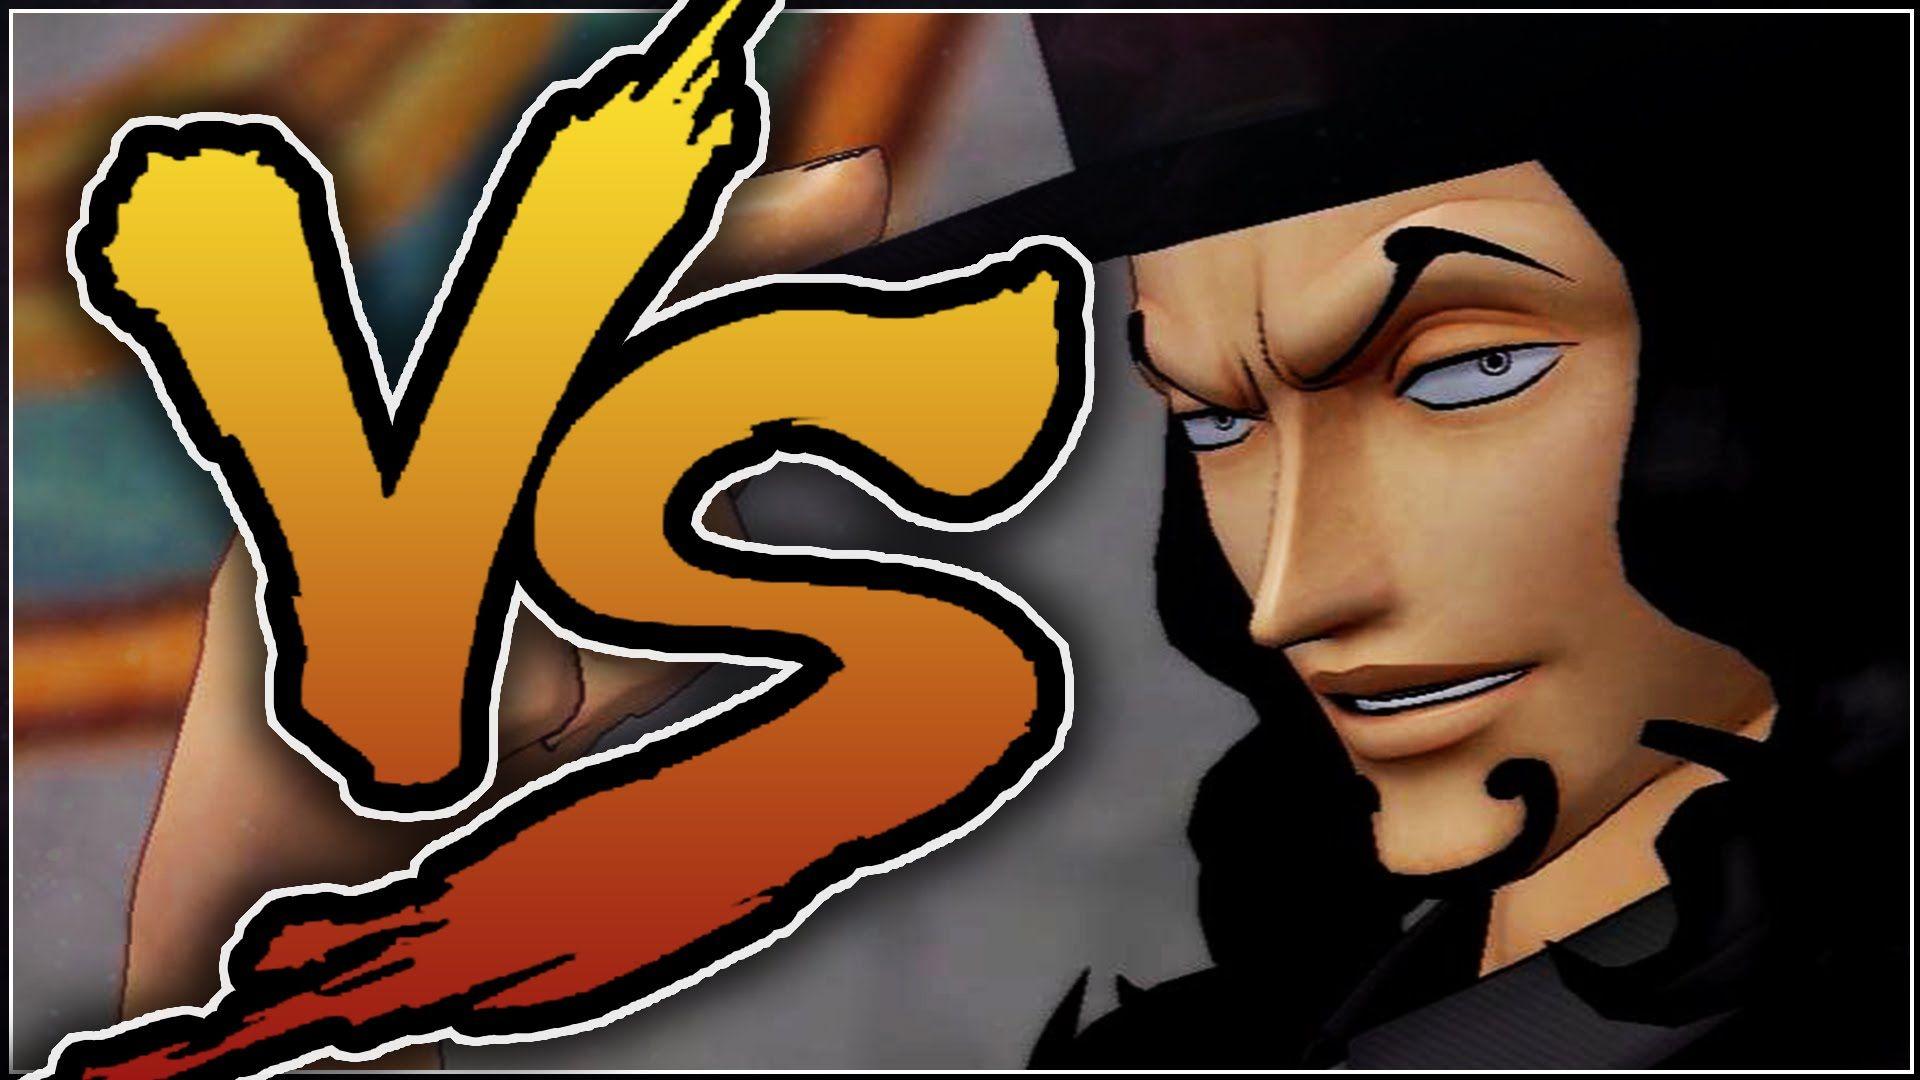 One Piece: Pirate Warriors 3 Rob Lucci